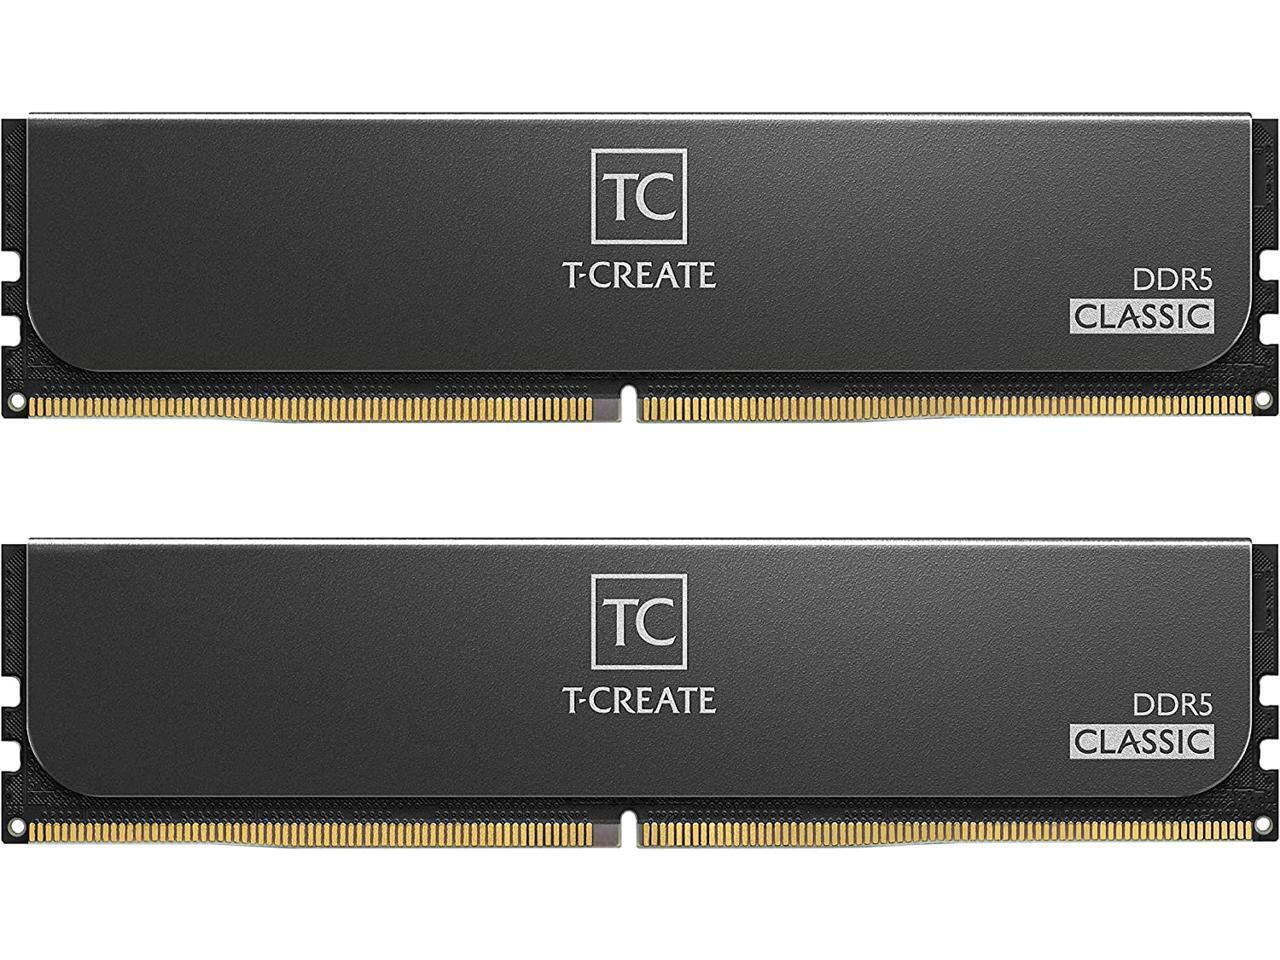 TEAMGROUP T-CREATE EXPERT 32GB (2 x 16GB) PC5-51200 (DDR5-6400) DIMM Memory -...